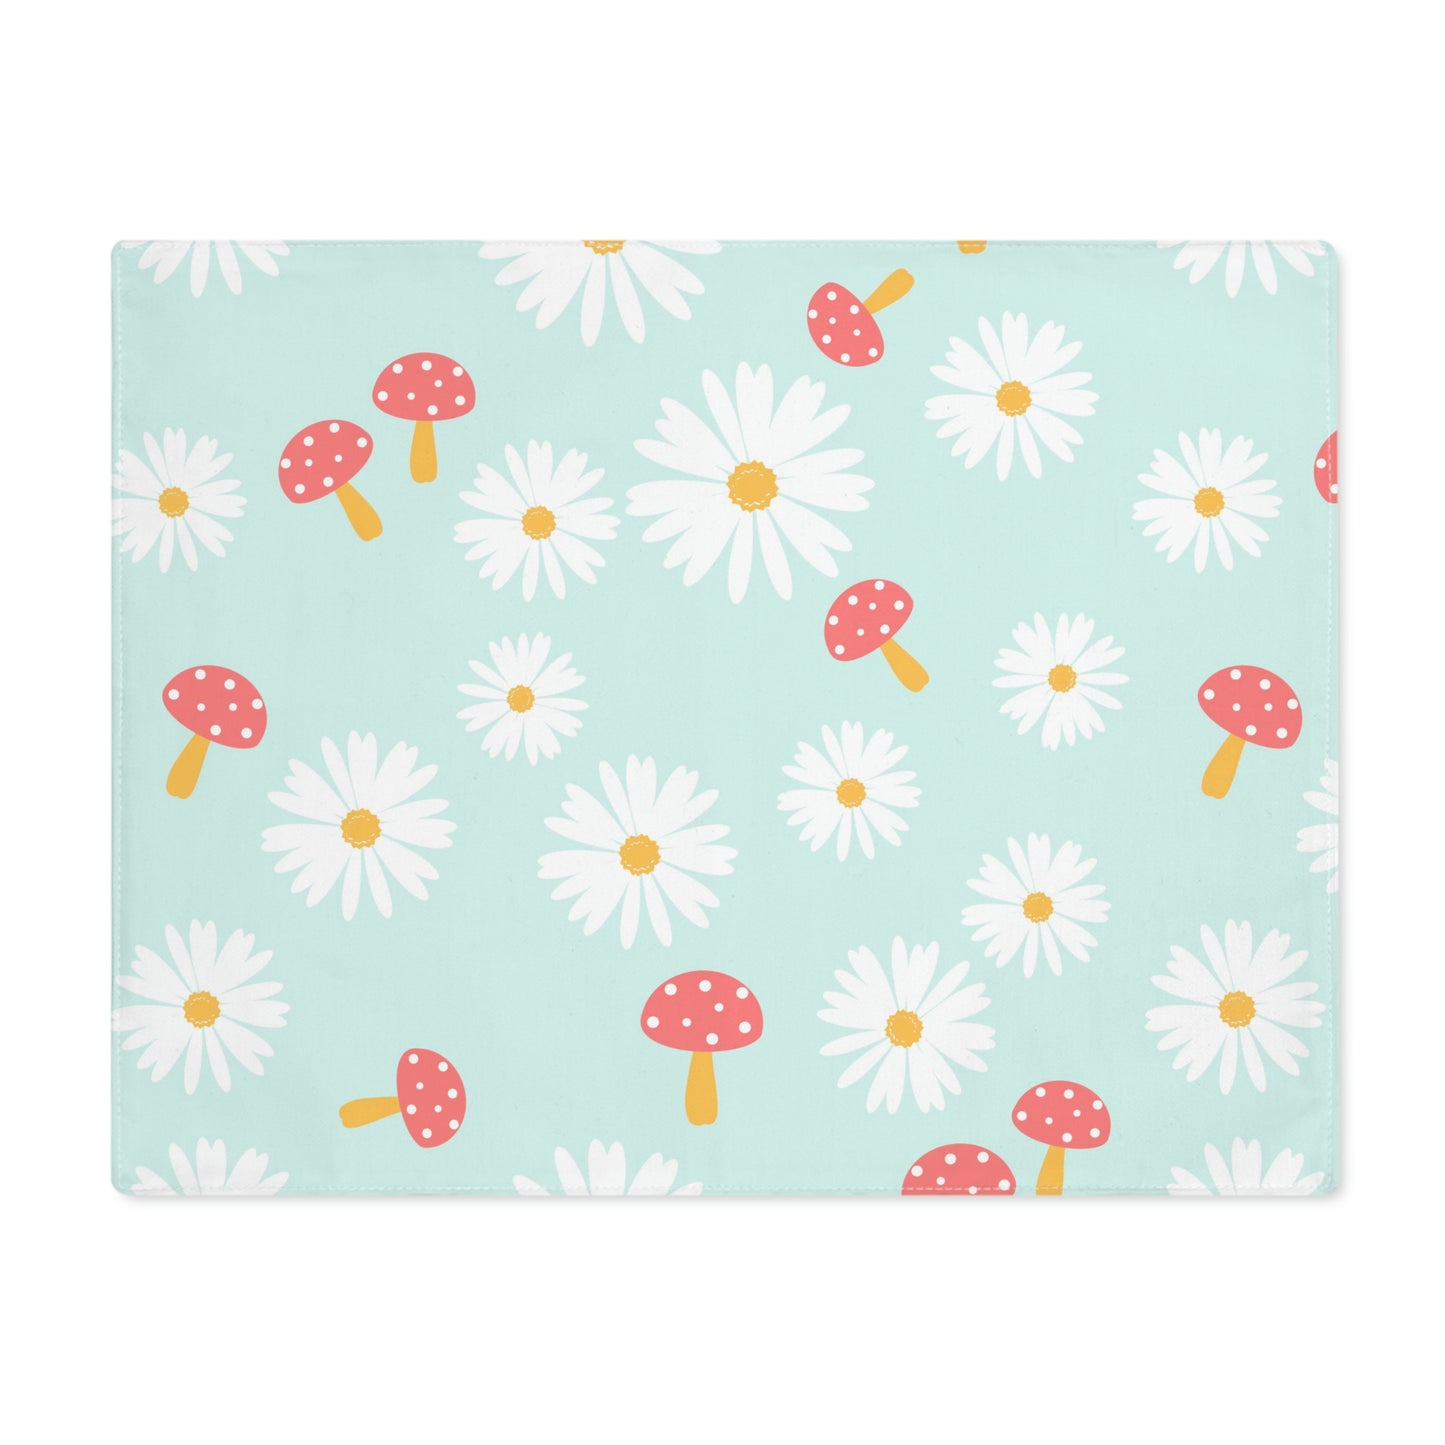 Daisies and Mushrooms Placemat, 1pc